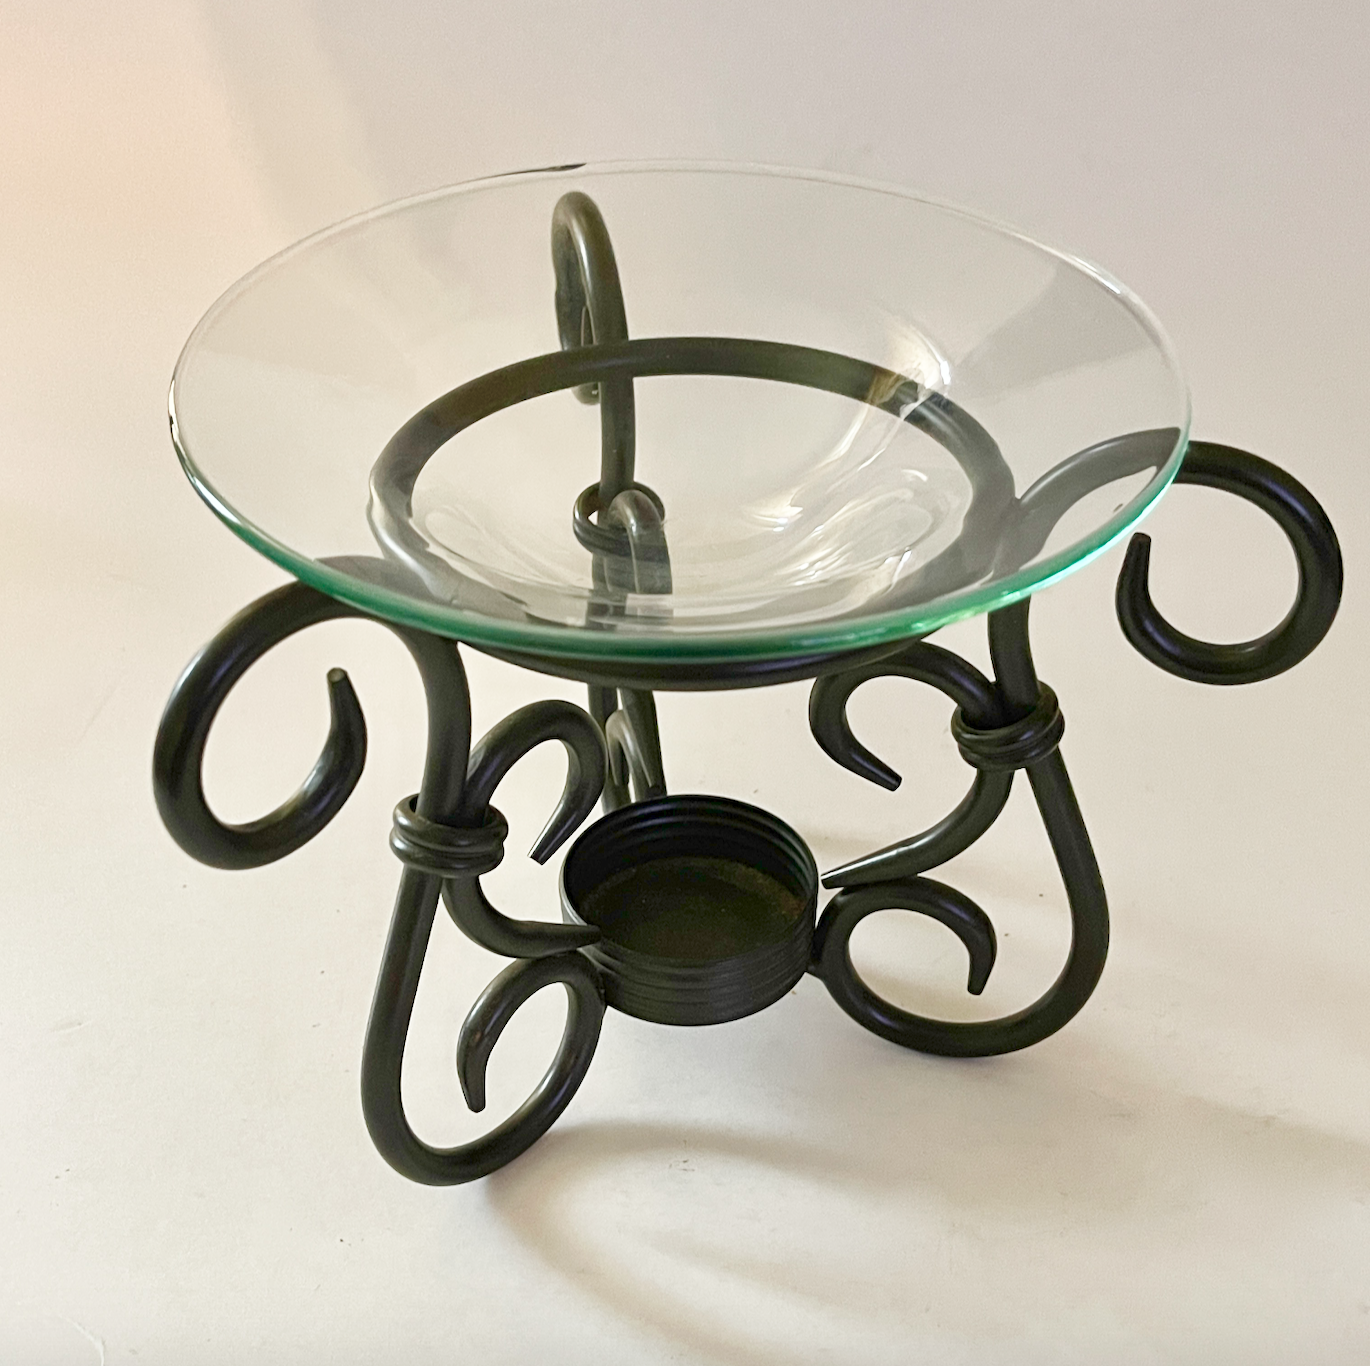 Primary image for Partylite Glass Aroma Melts Warmer Wrought Iron Candle Holder